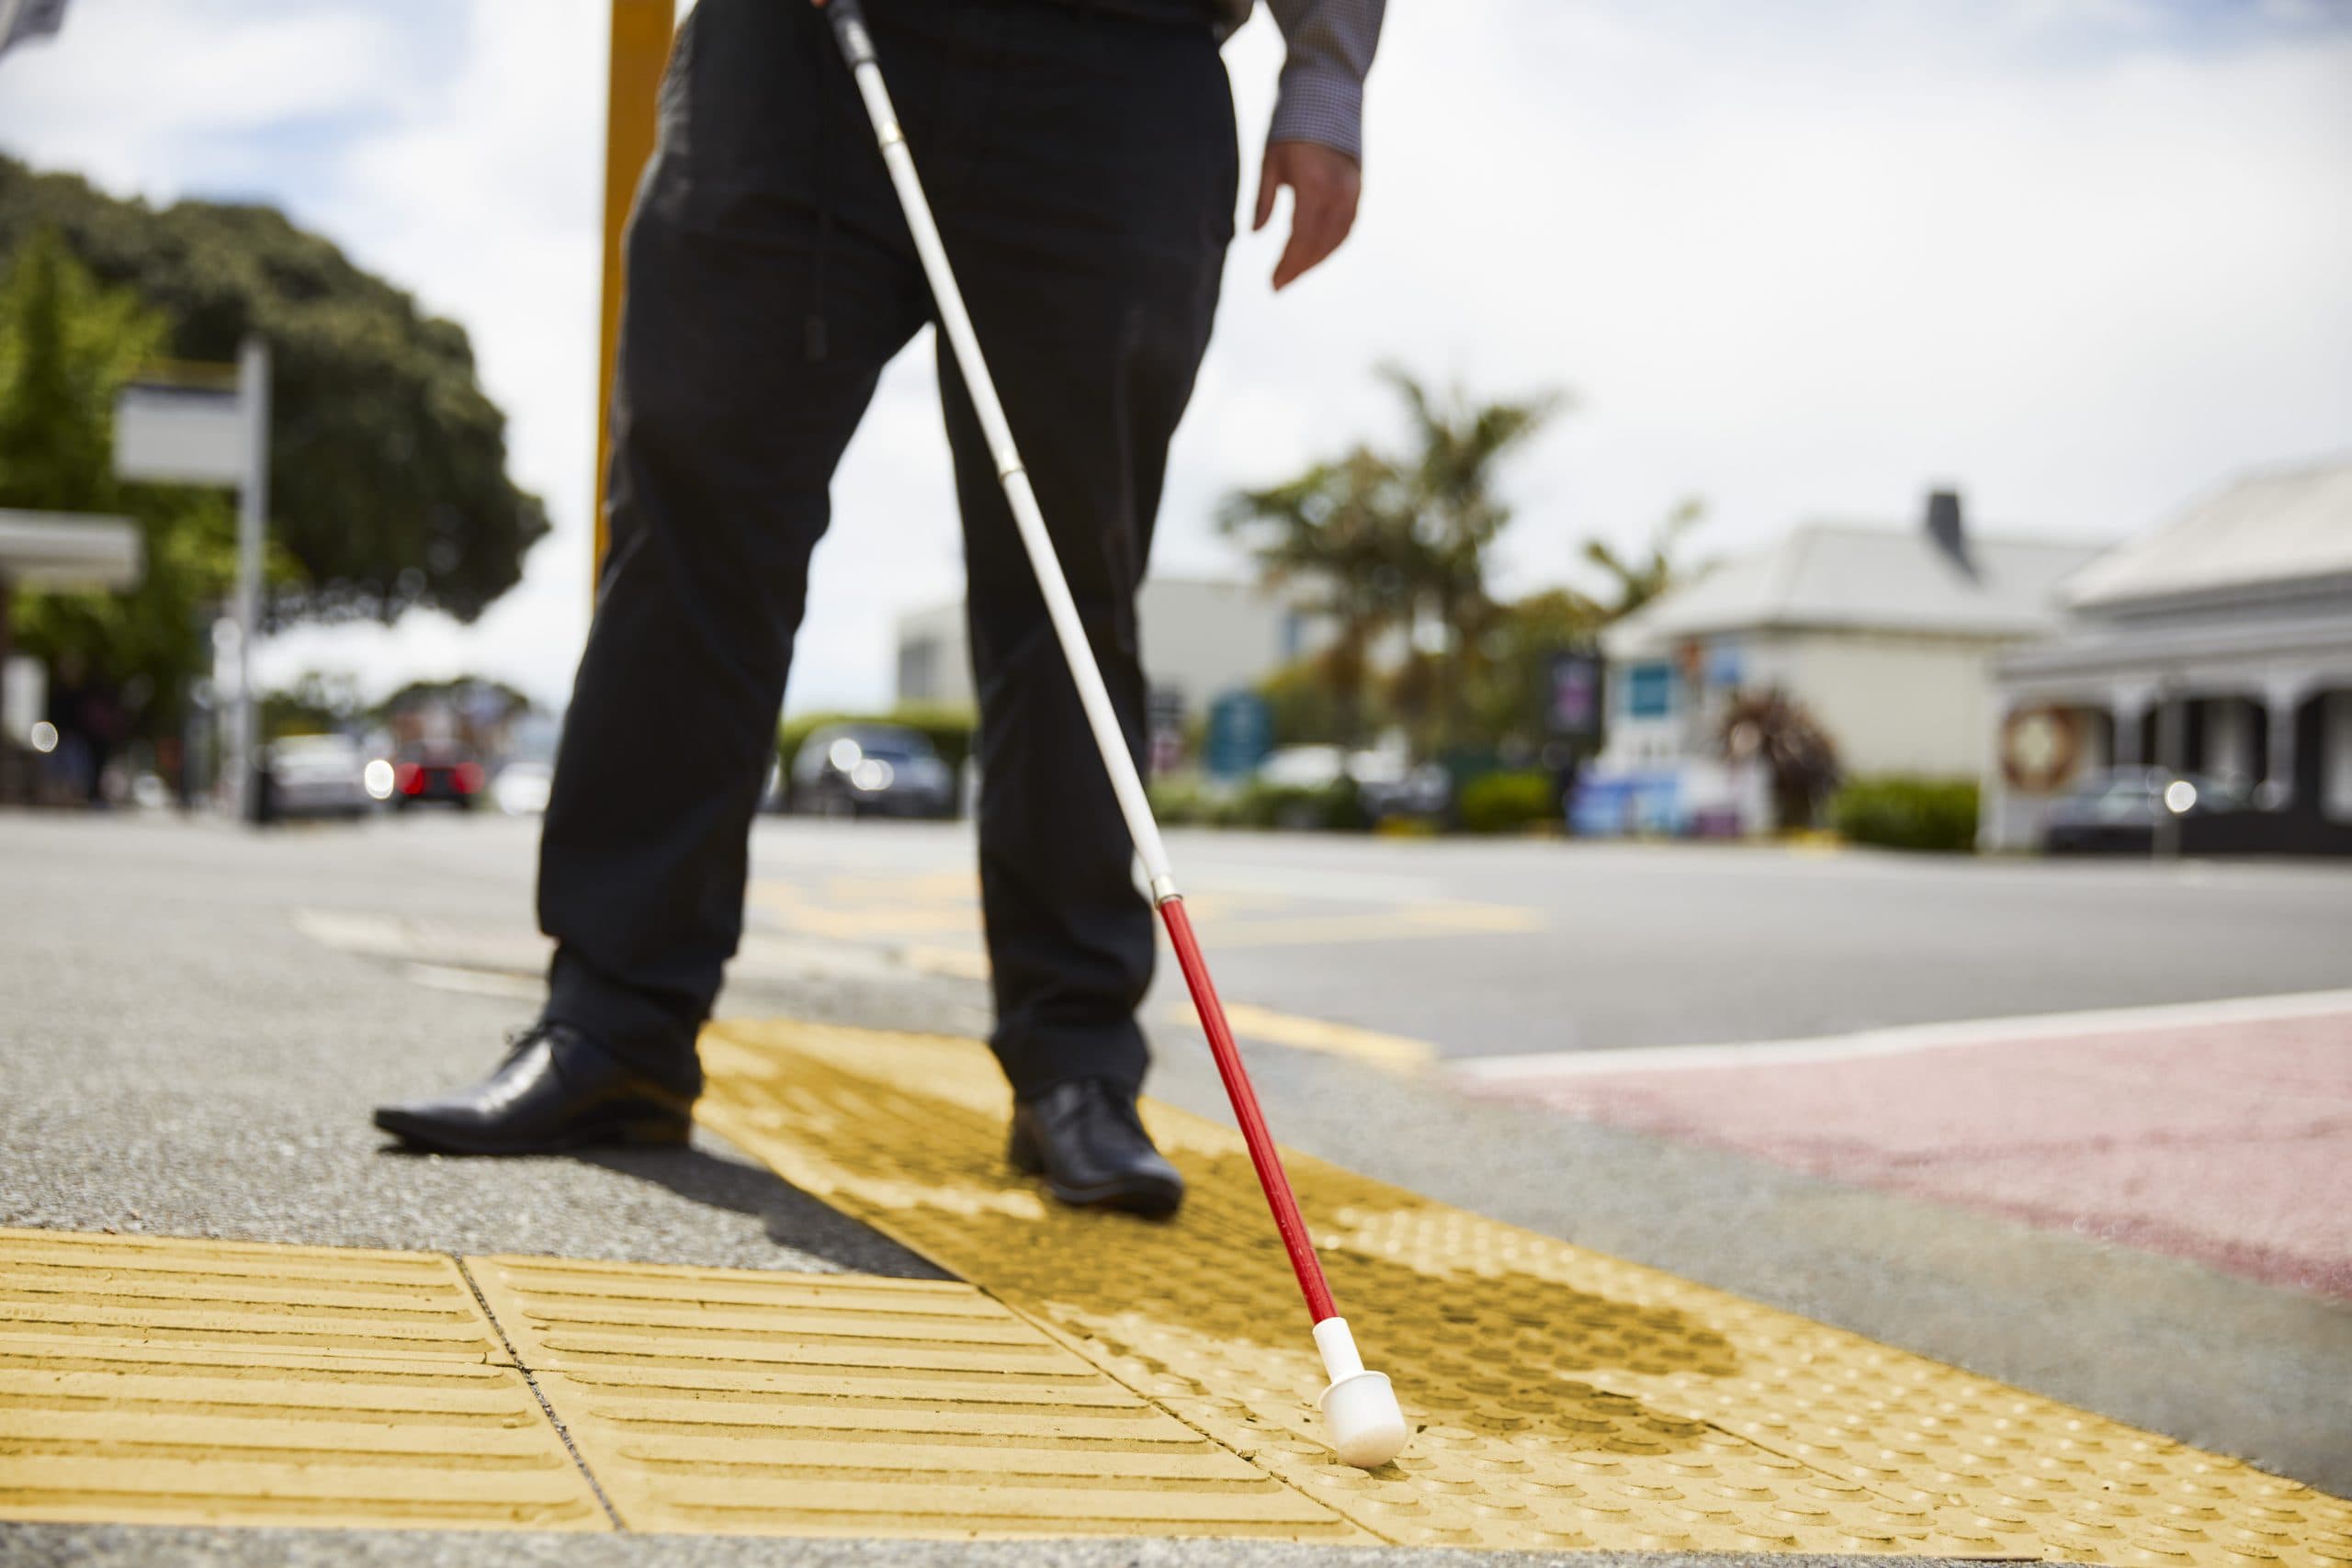 A male client is walking towards the camera on the pavement and his white cane is over the tactile markings